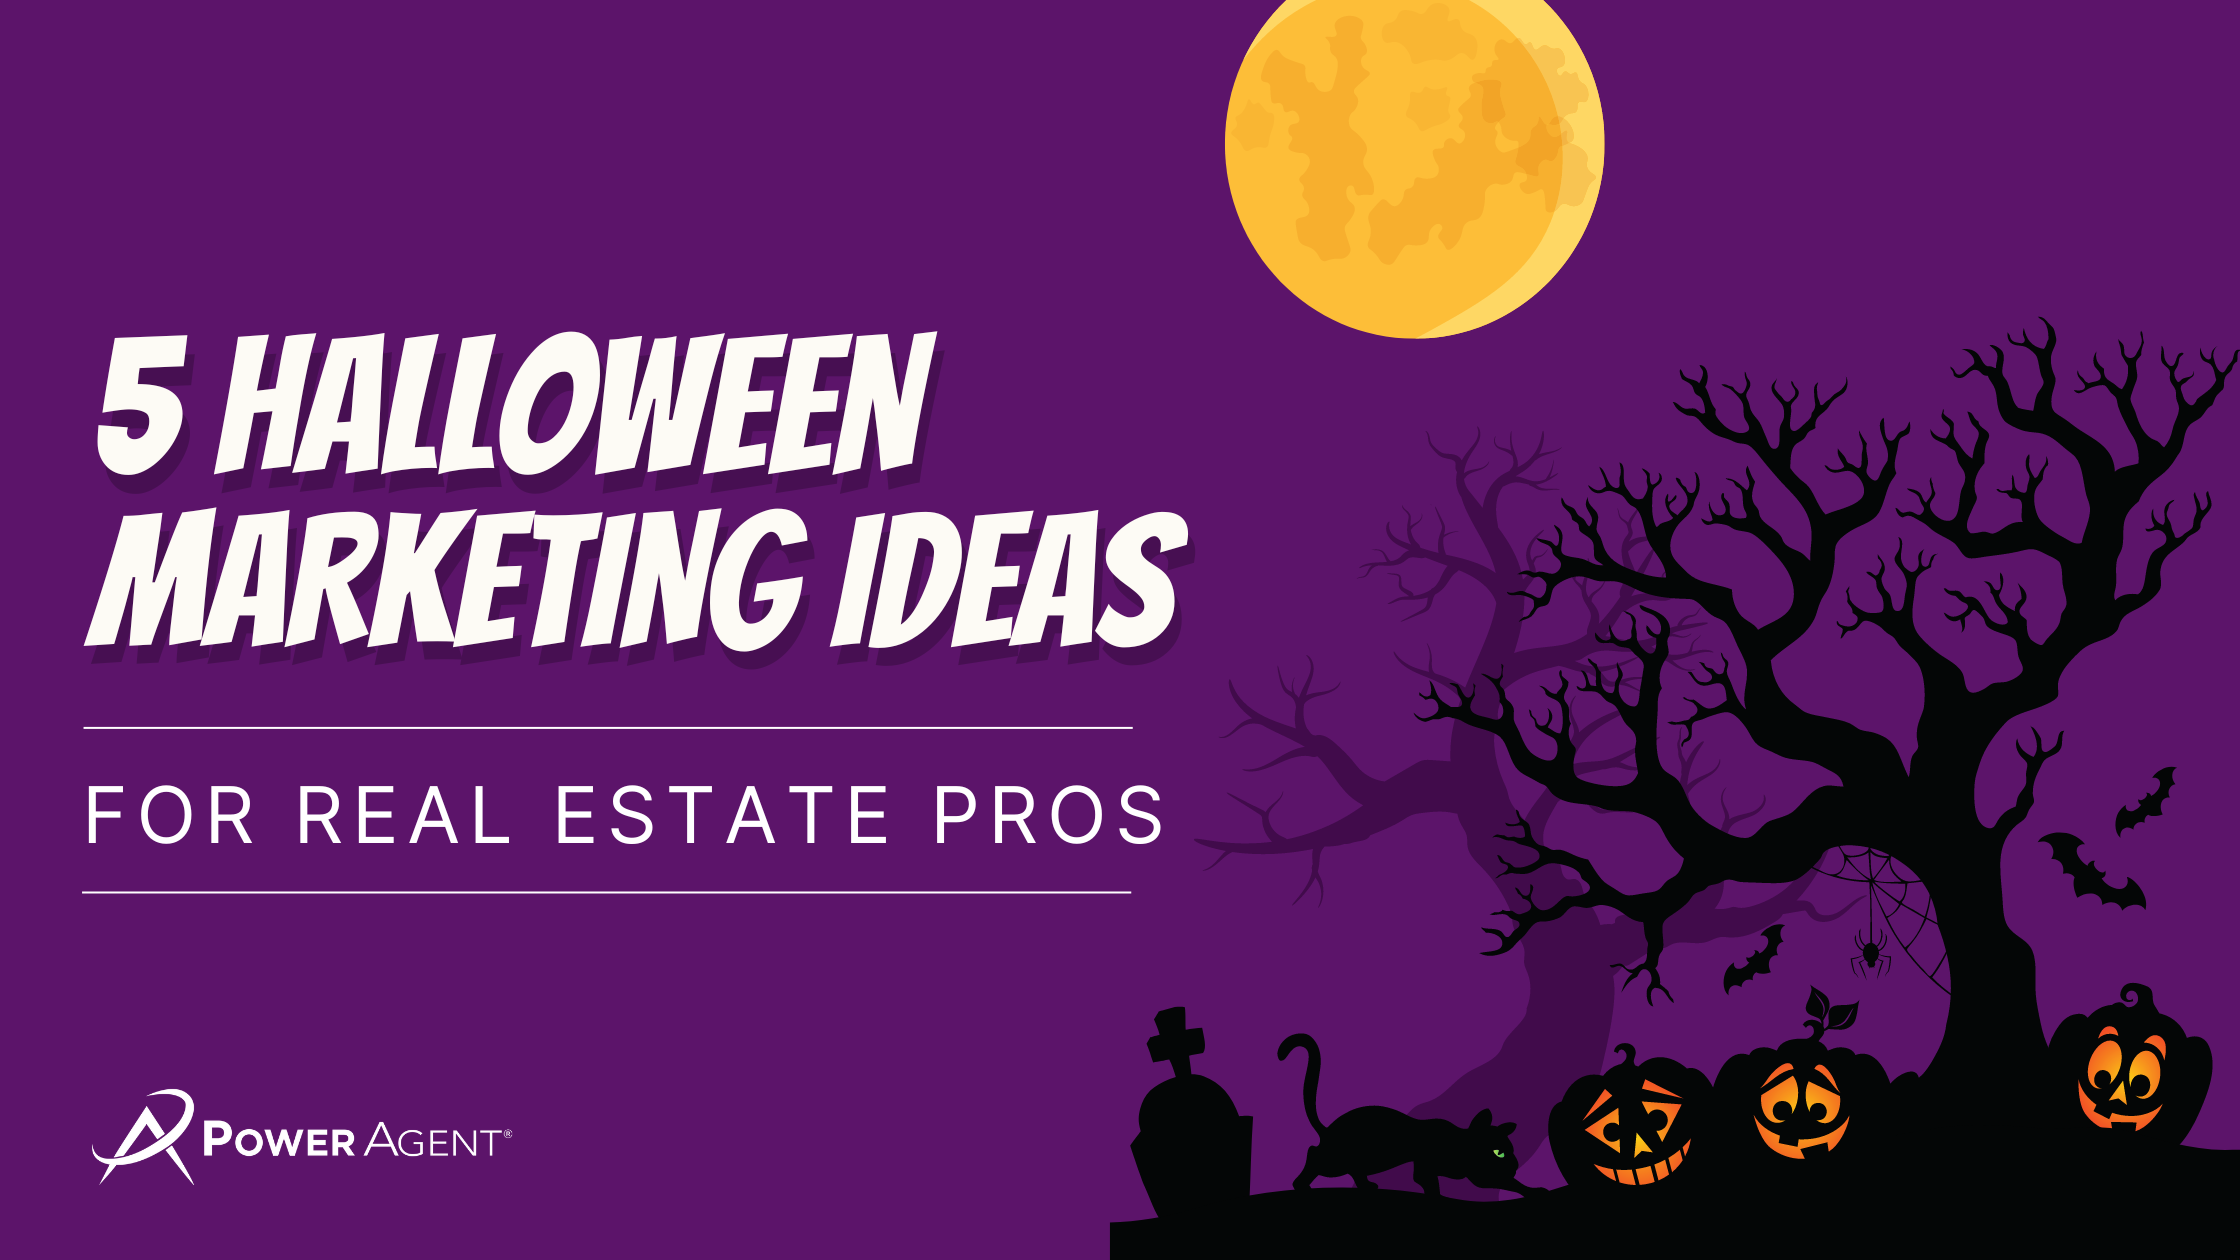 7_Halloween_Marketing_Ideas_for_Real_Estate_Pros_2.png